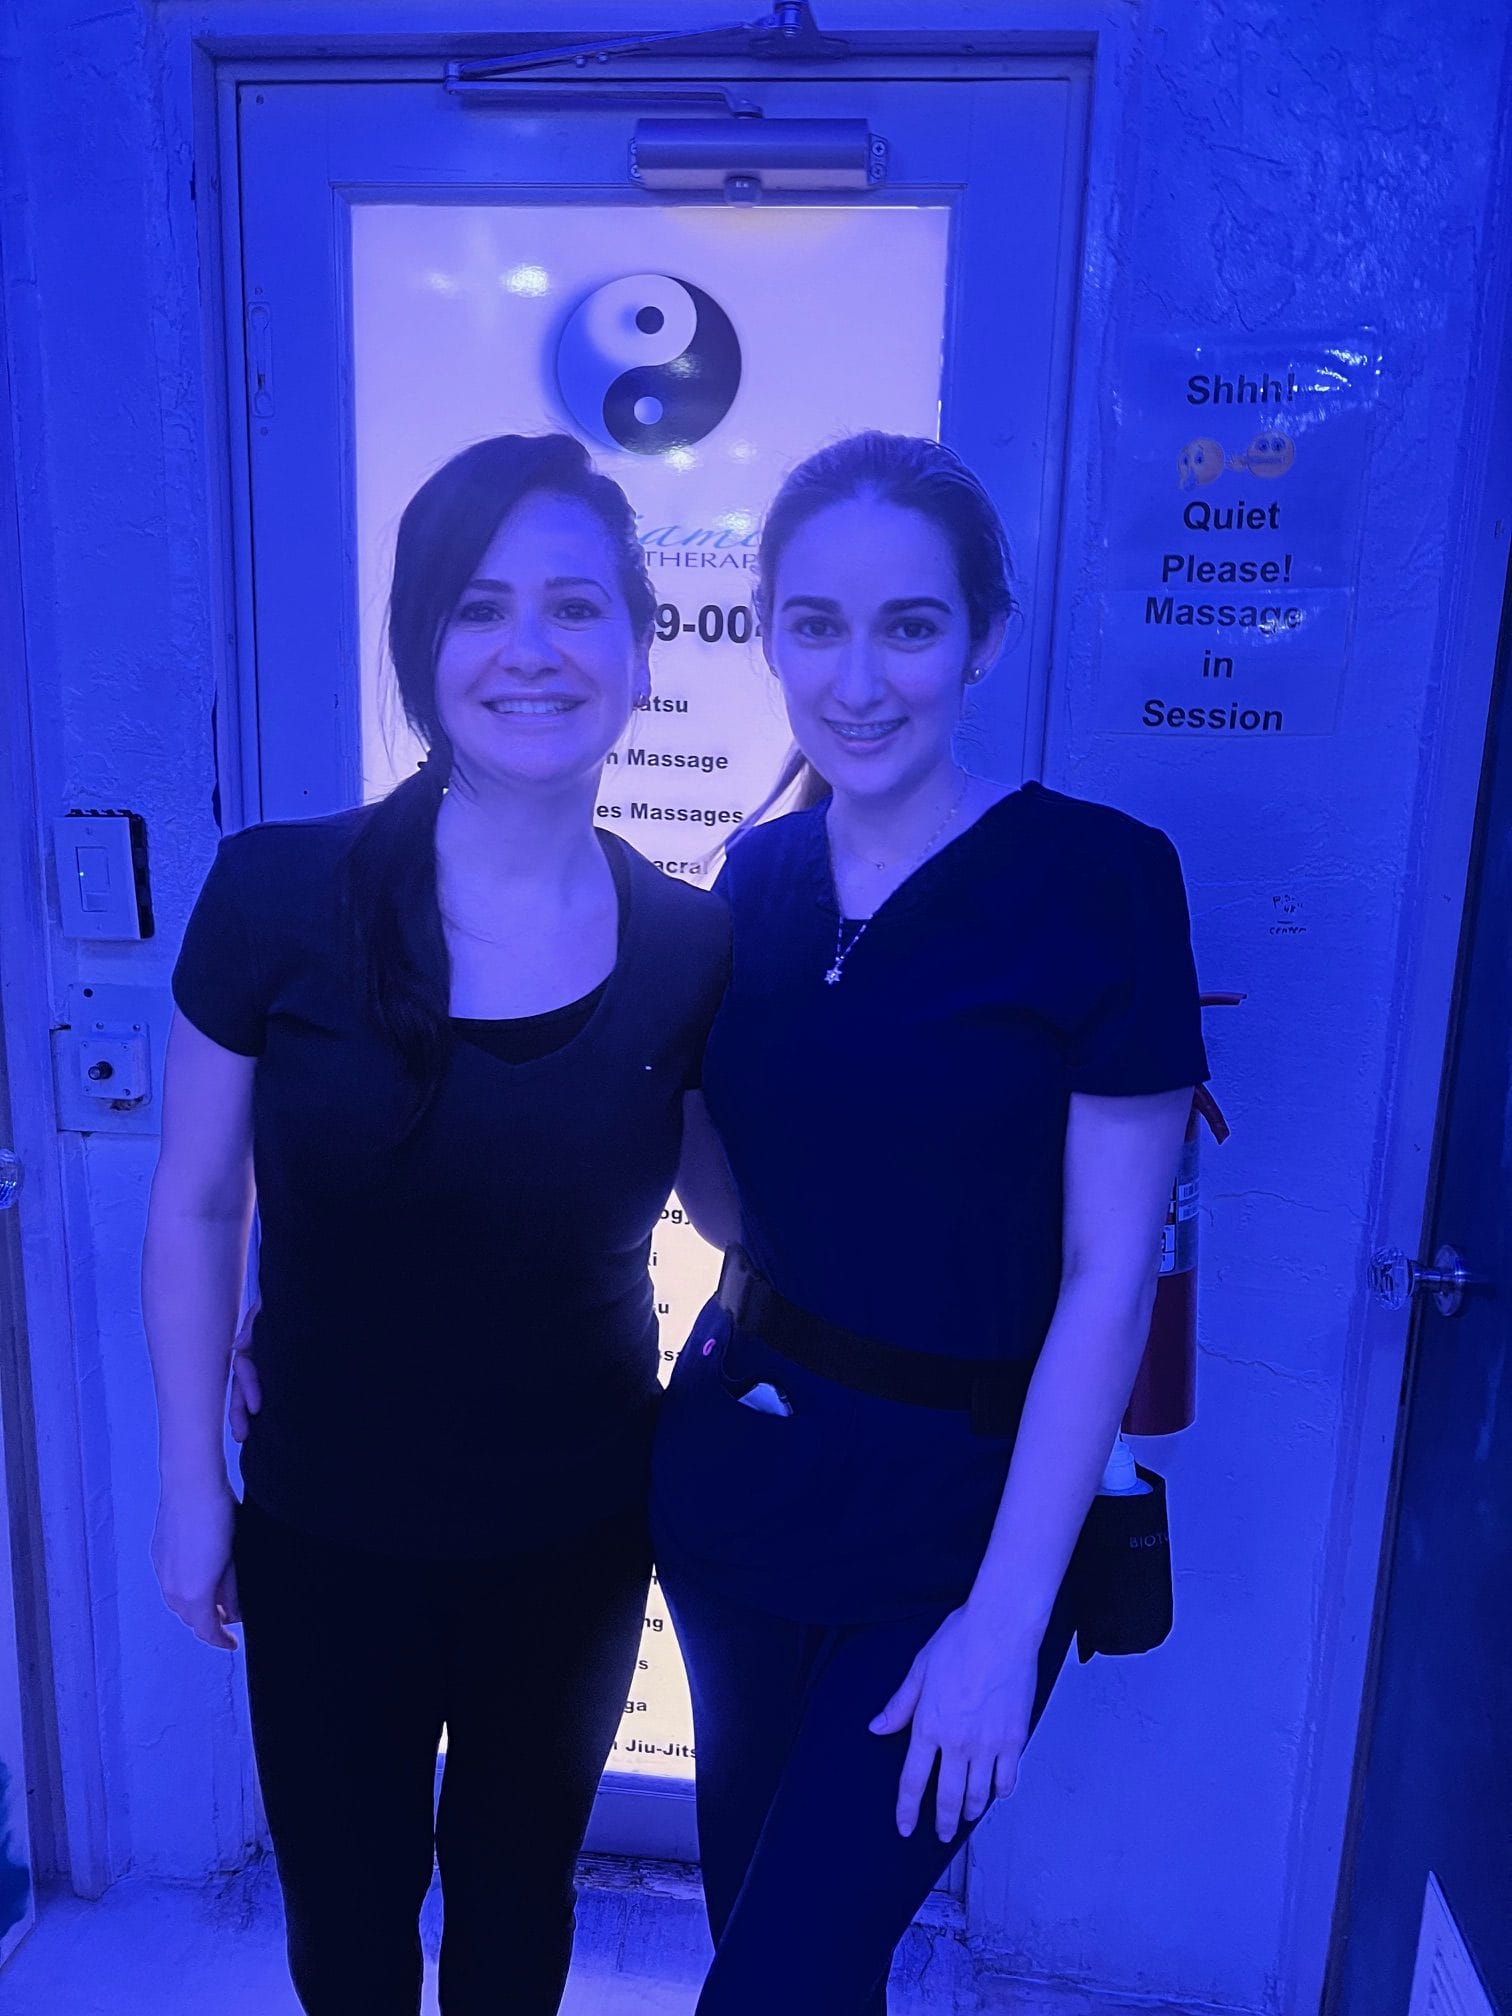 Two women stand side by side in a dimly lit room with a blue hue The door behind them features a Yin Yang symbol and a sign requesting quiet for ongoing massage sessions